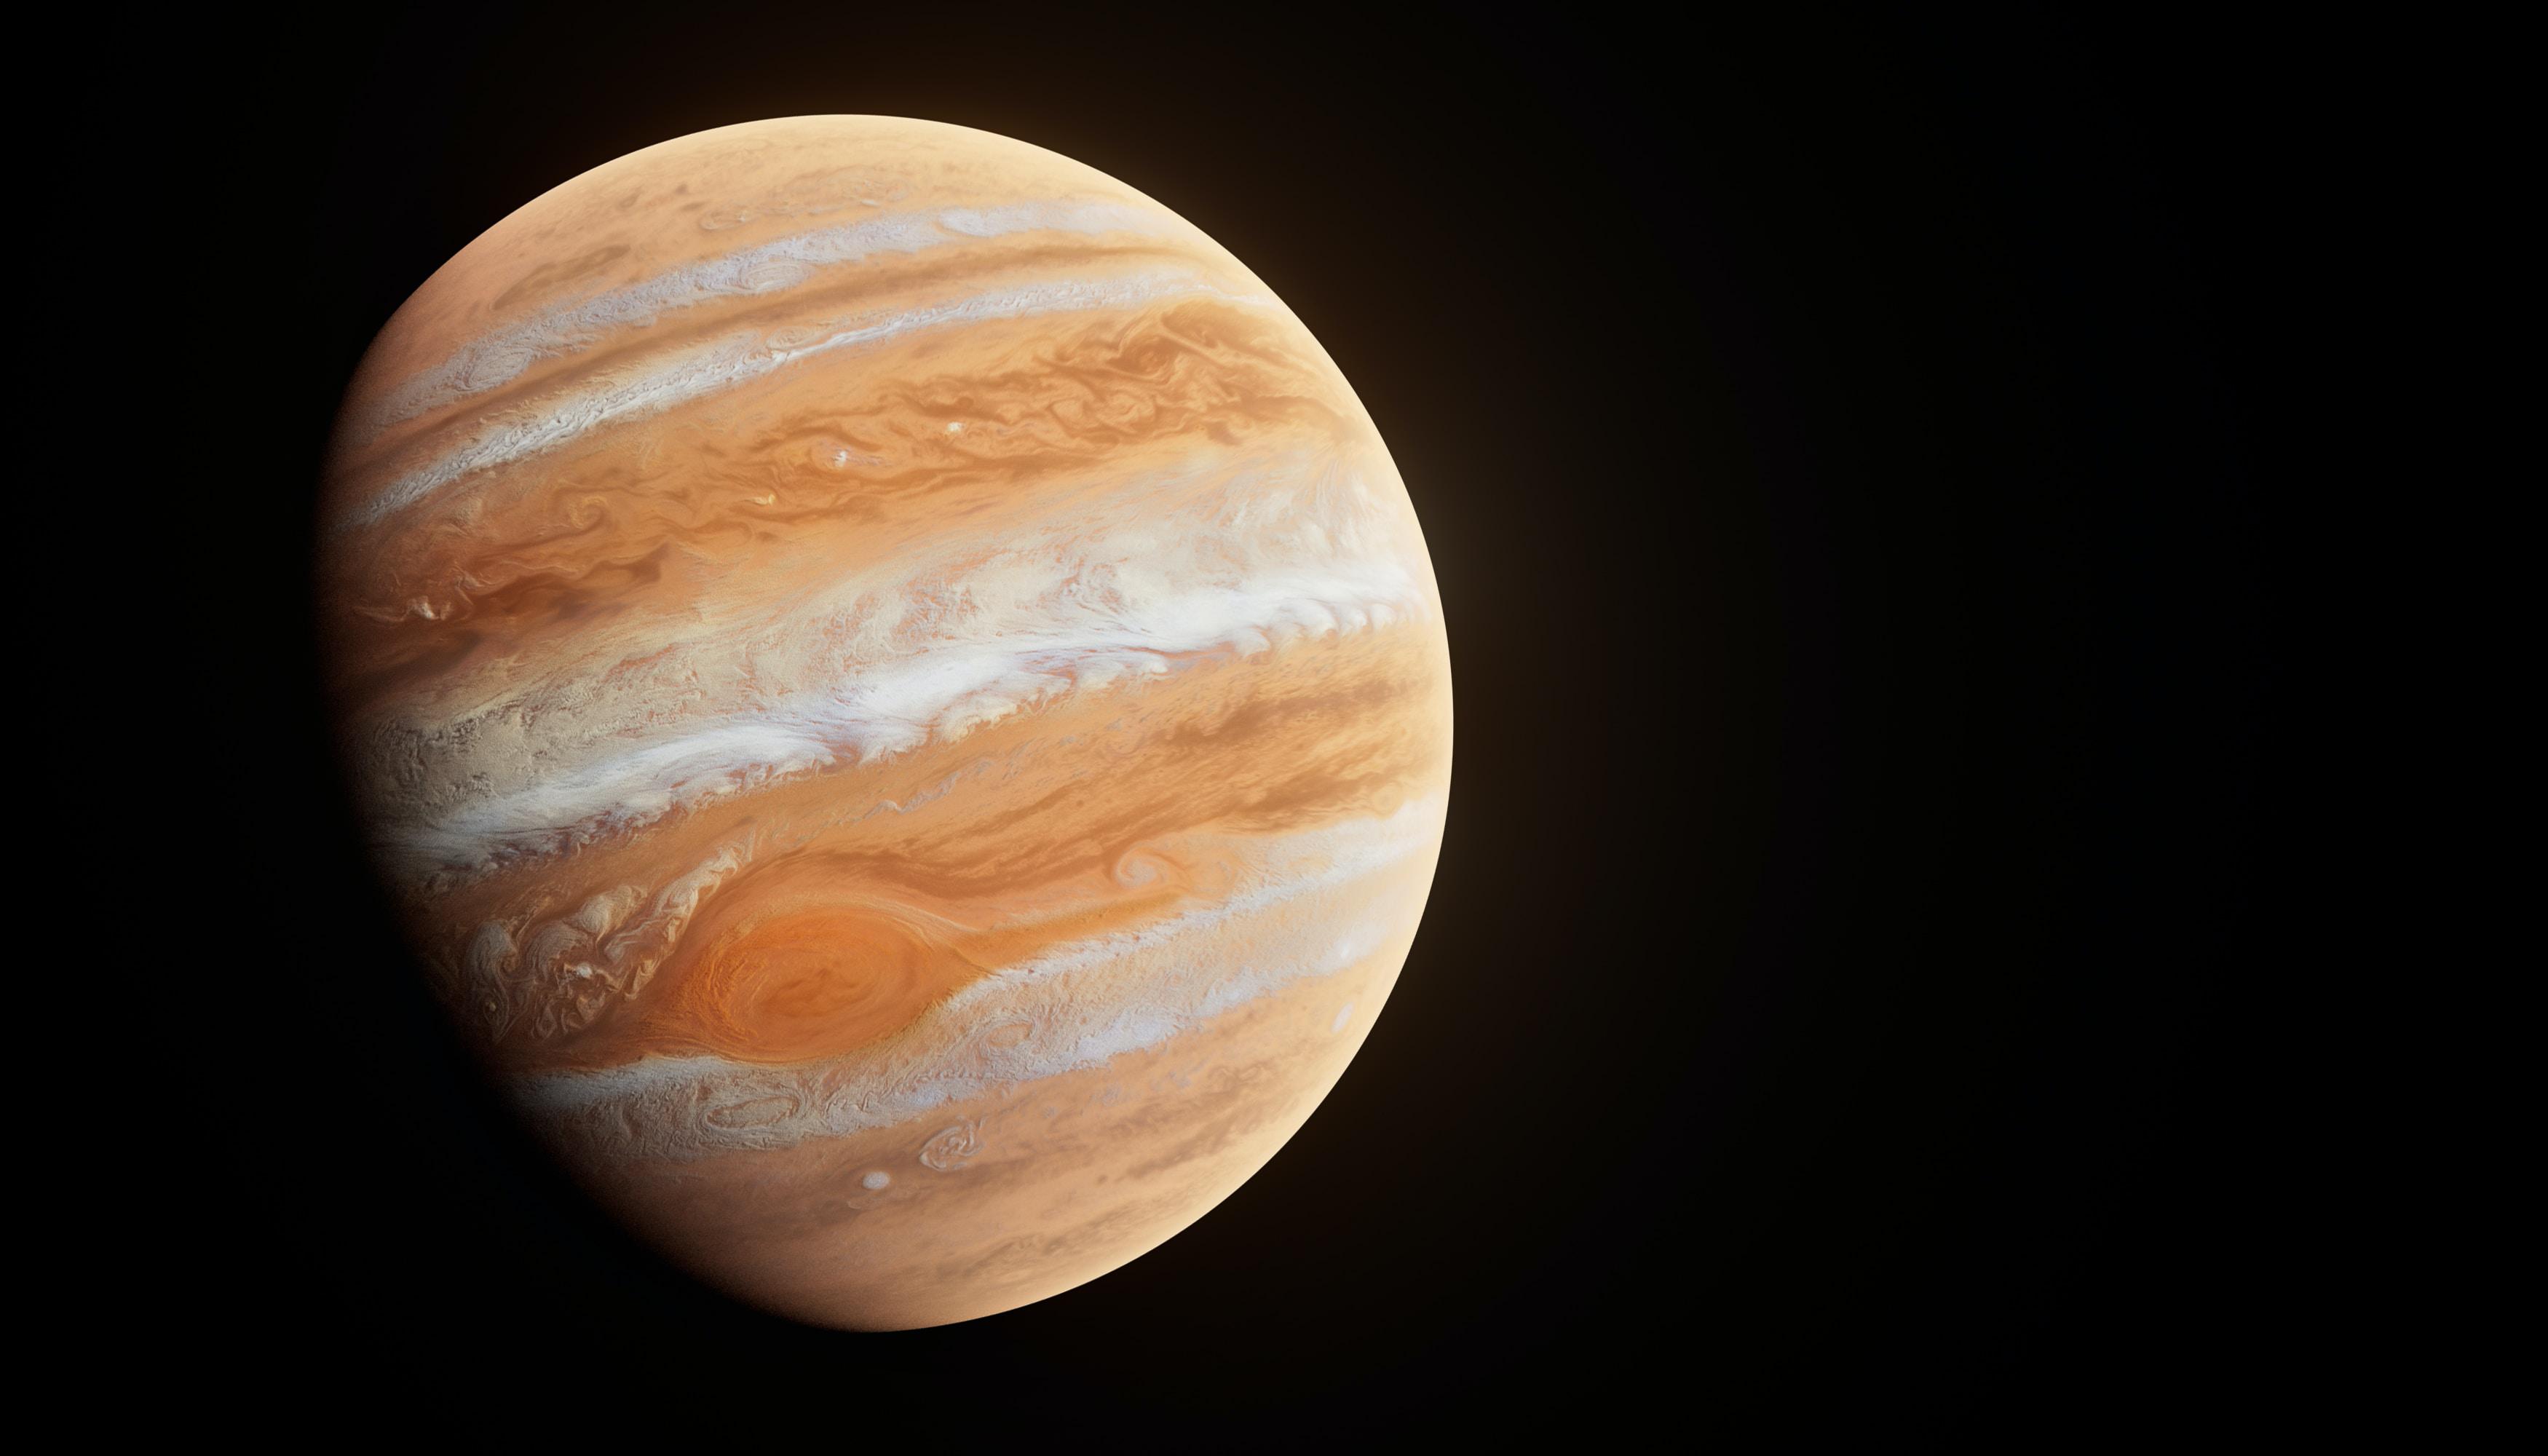 Jupiter 4K wallpaper for your desktop or mobile screen free and easy to download